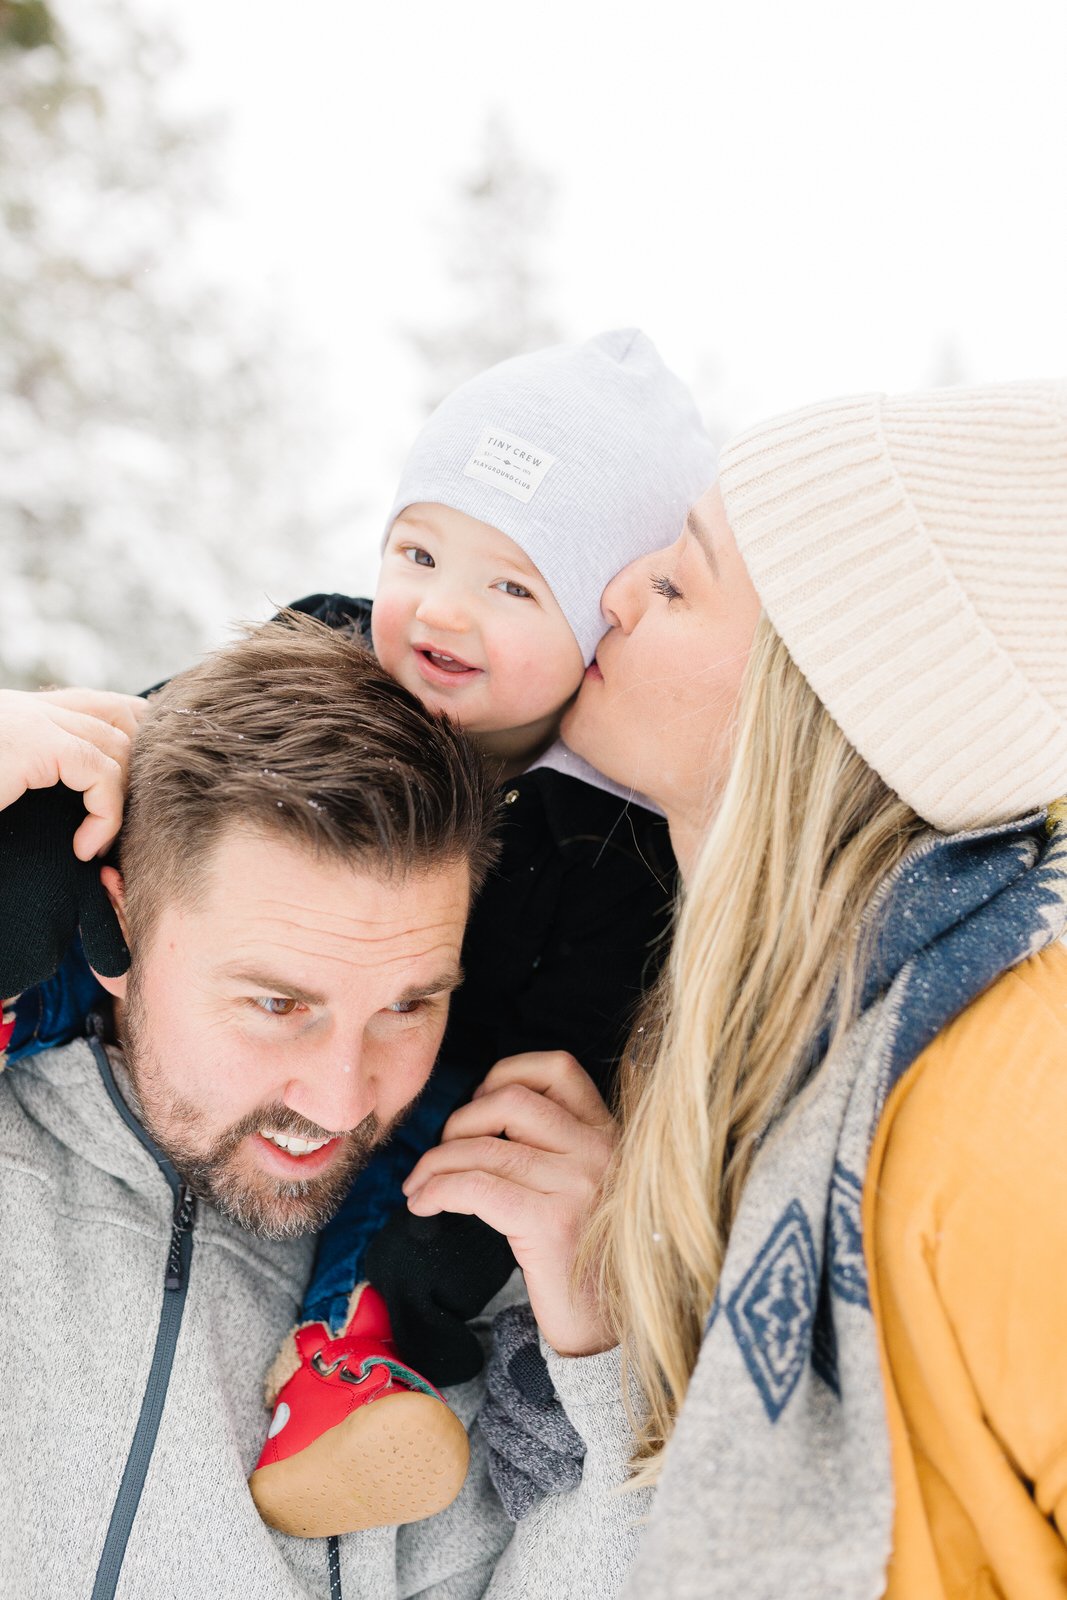 Snowy family pictures- Utah Family photographer- Salt Lake Family photographer- Winter in Utah